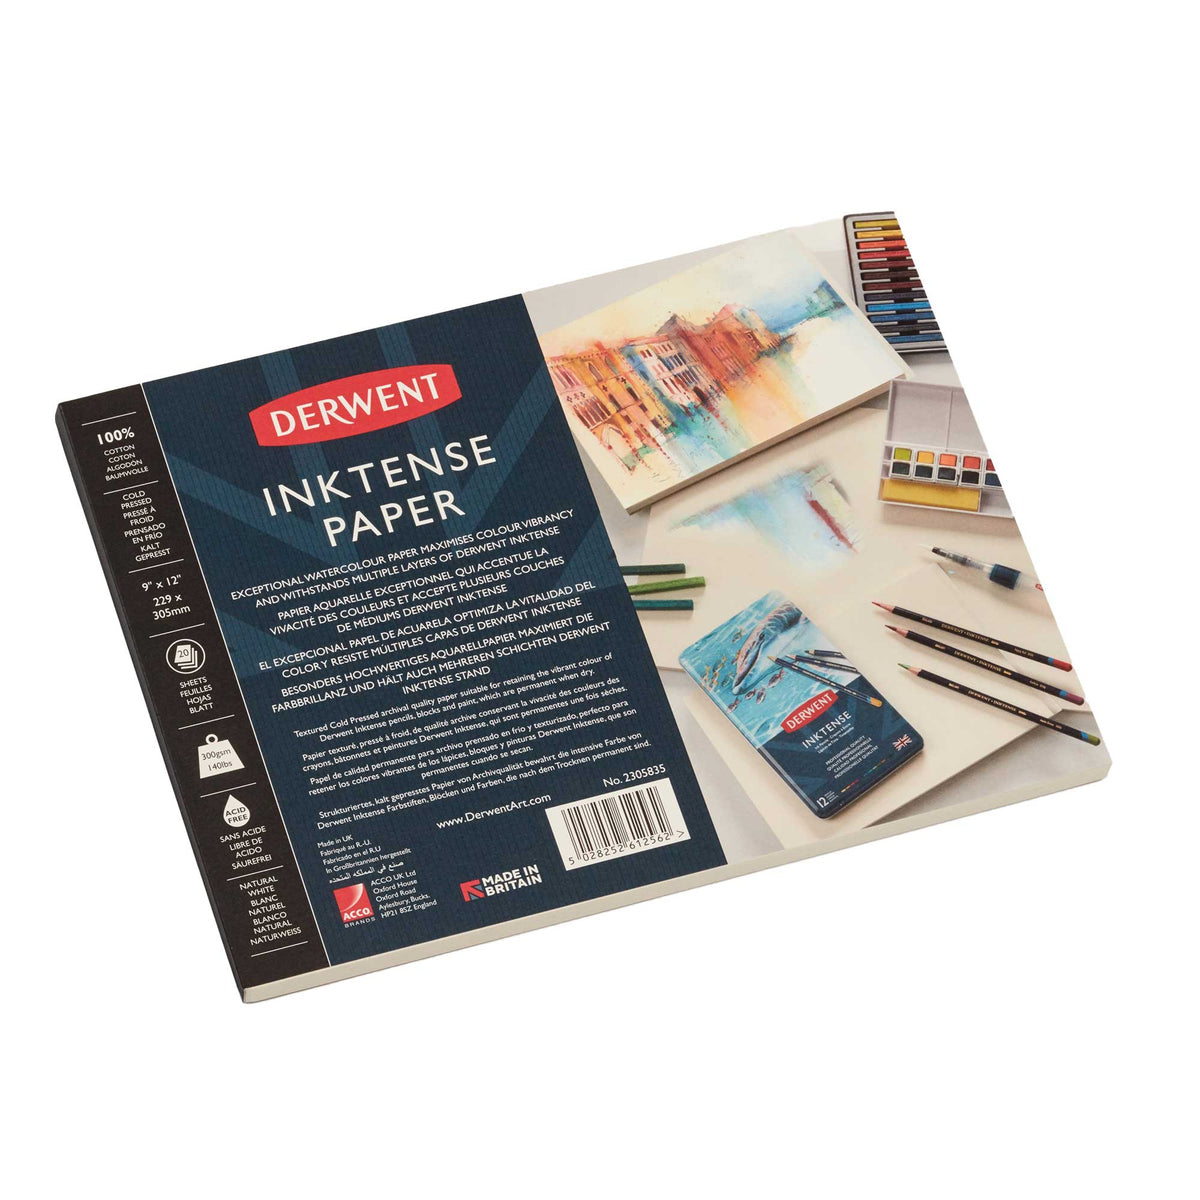 Derwent Inktense Paper Pad - 20 Sheets 300gsm/ 140lbs - 9x12 inches